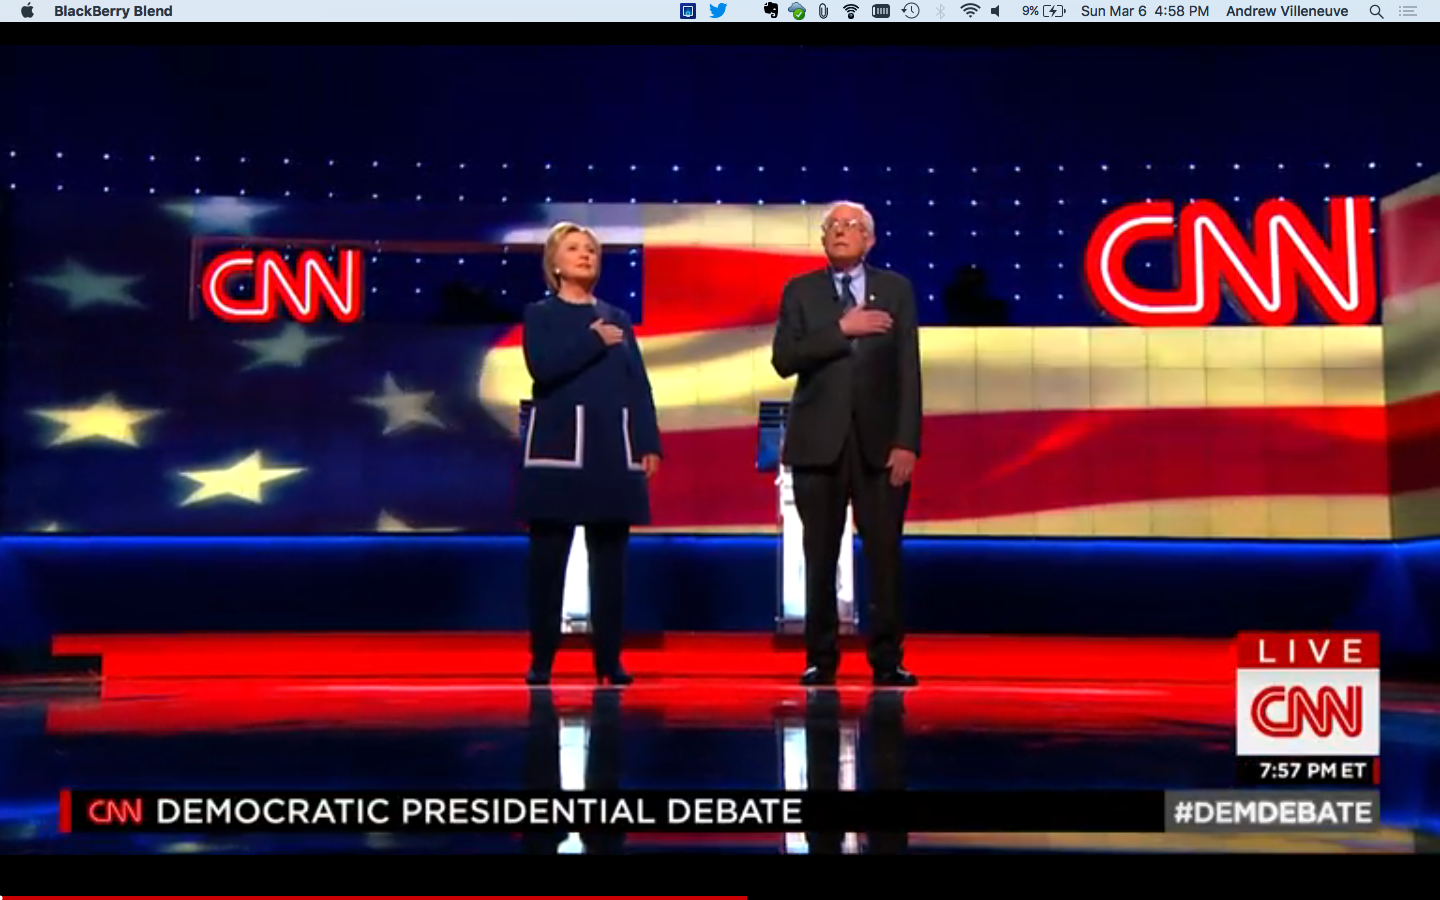 Hillary Clinton and Bernie Sanders on stage